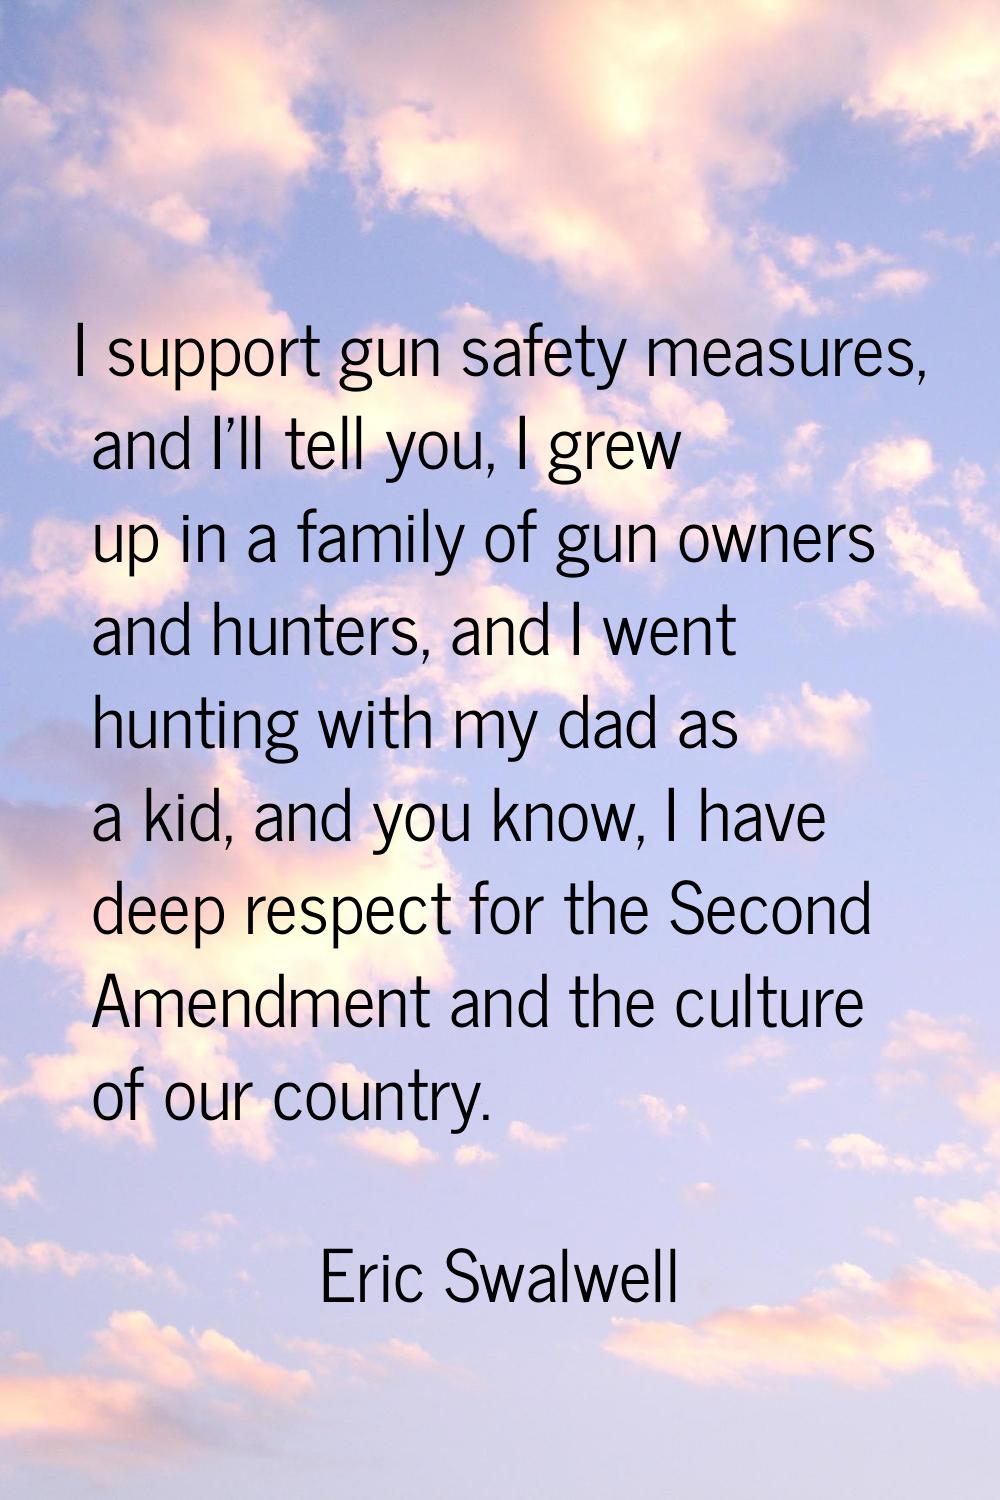 I support gun safety measures, and I'll tell you, I grew up in a family of gun owners and hunters, 